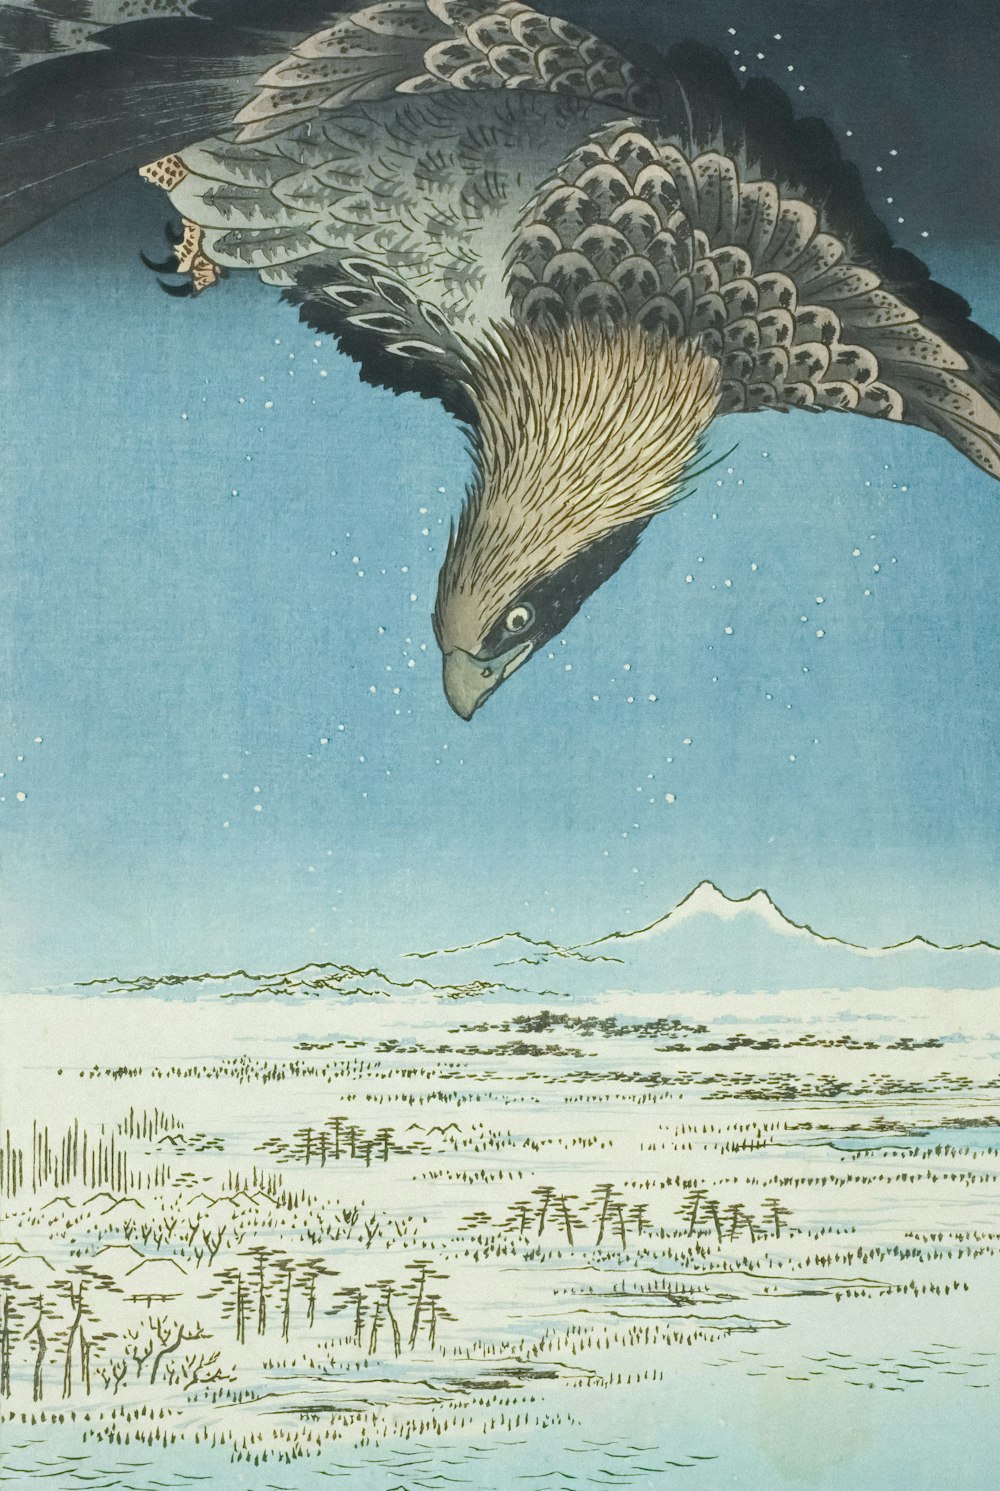 a painting of an eagle flying over a snowy landscape